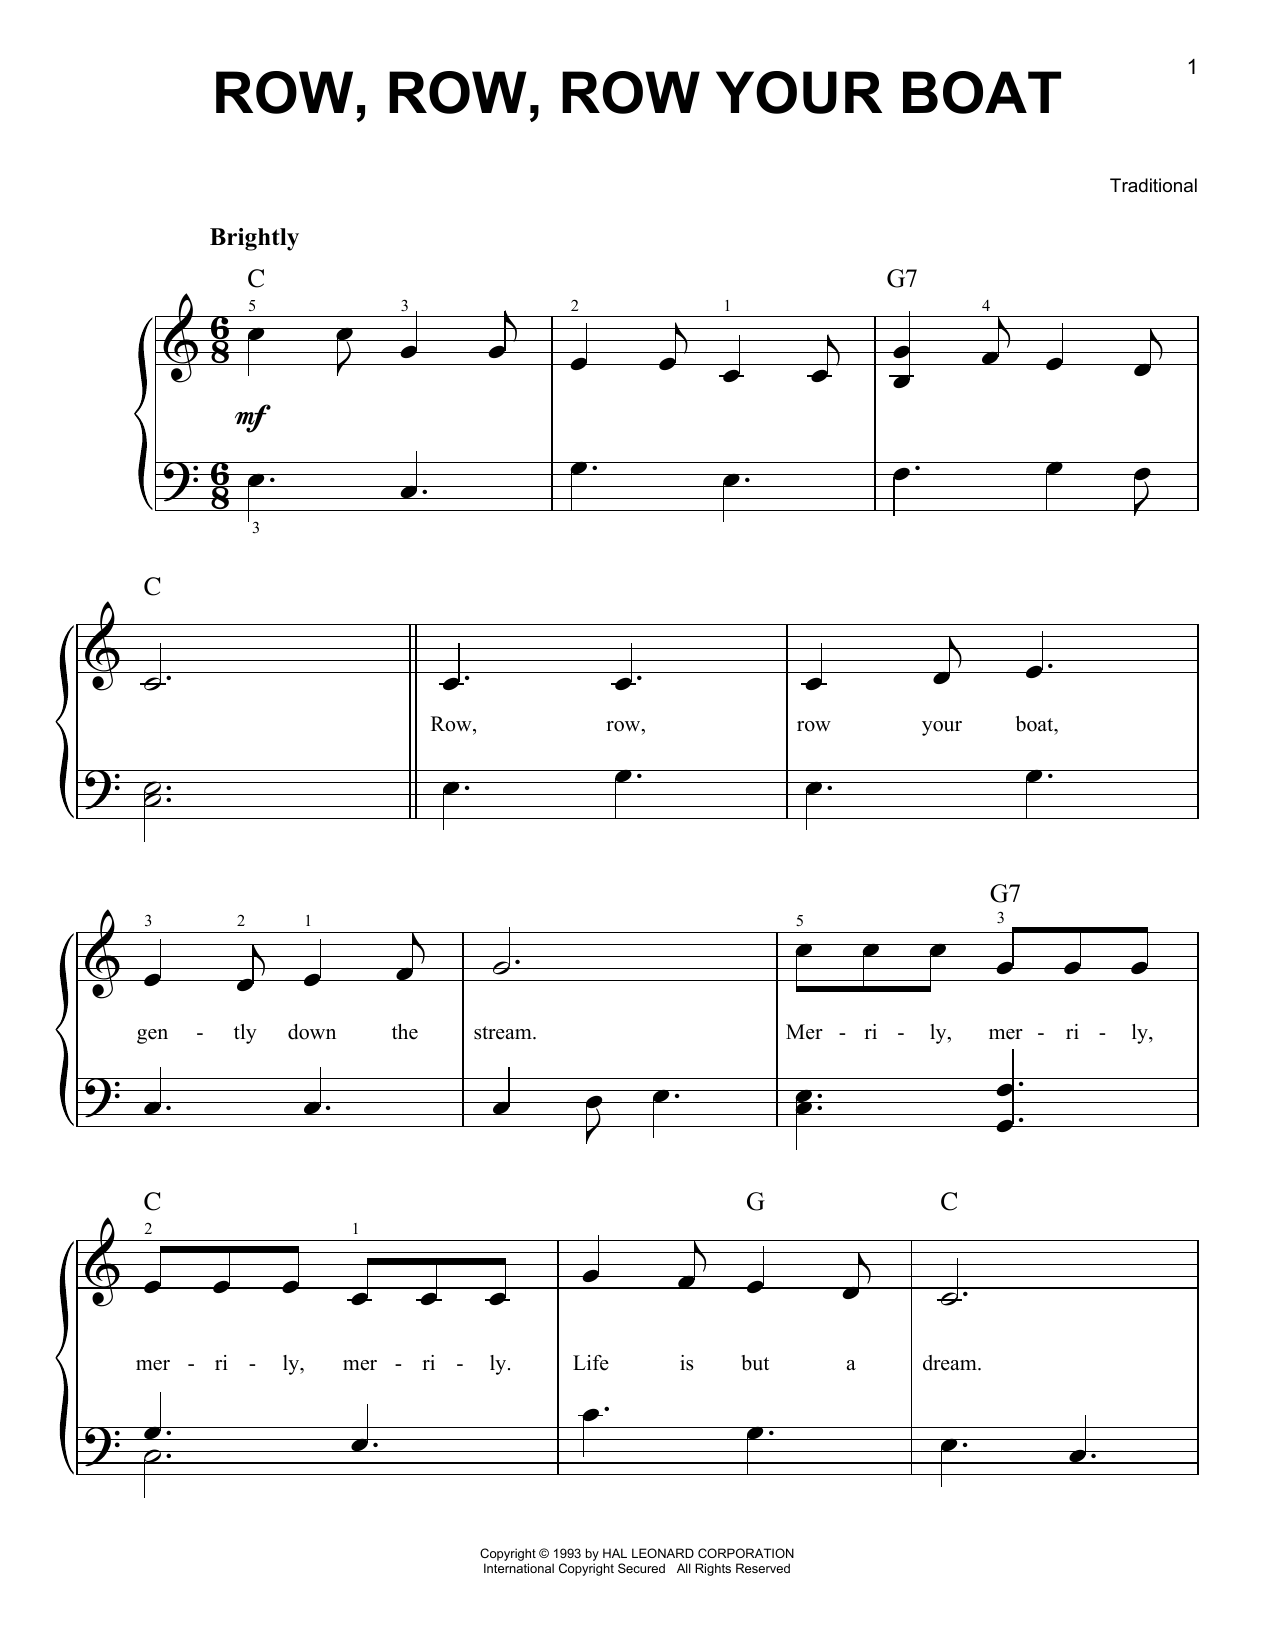 Download Traditional Nursery Rhyme Row, Row, Row Your Boat Sheet Music